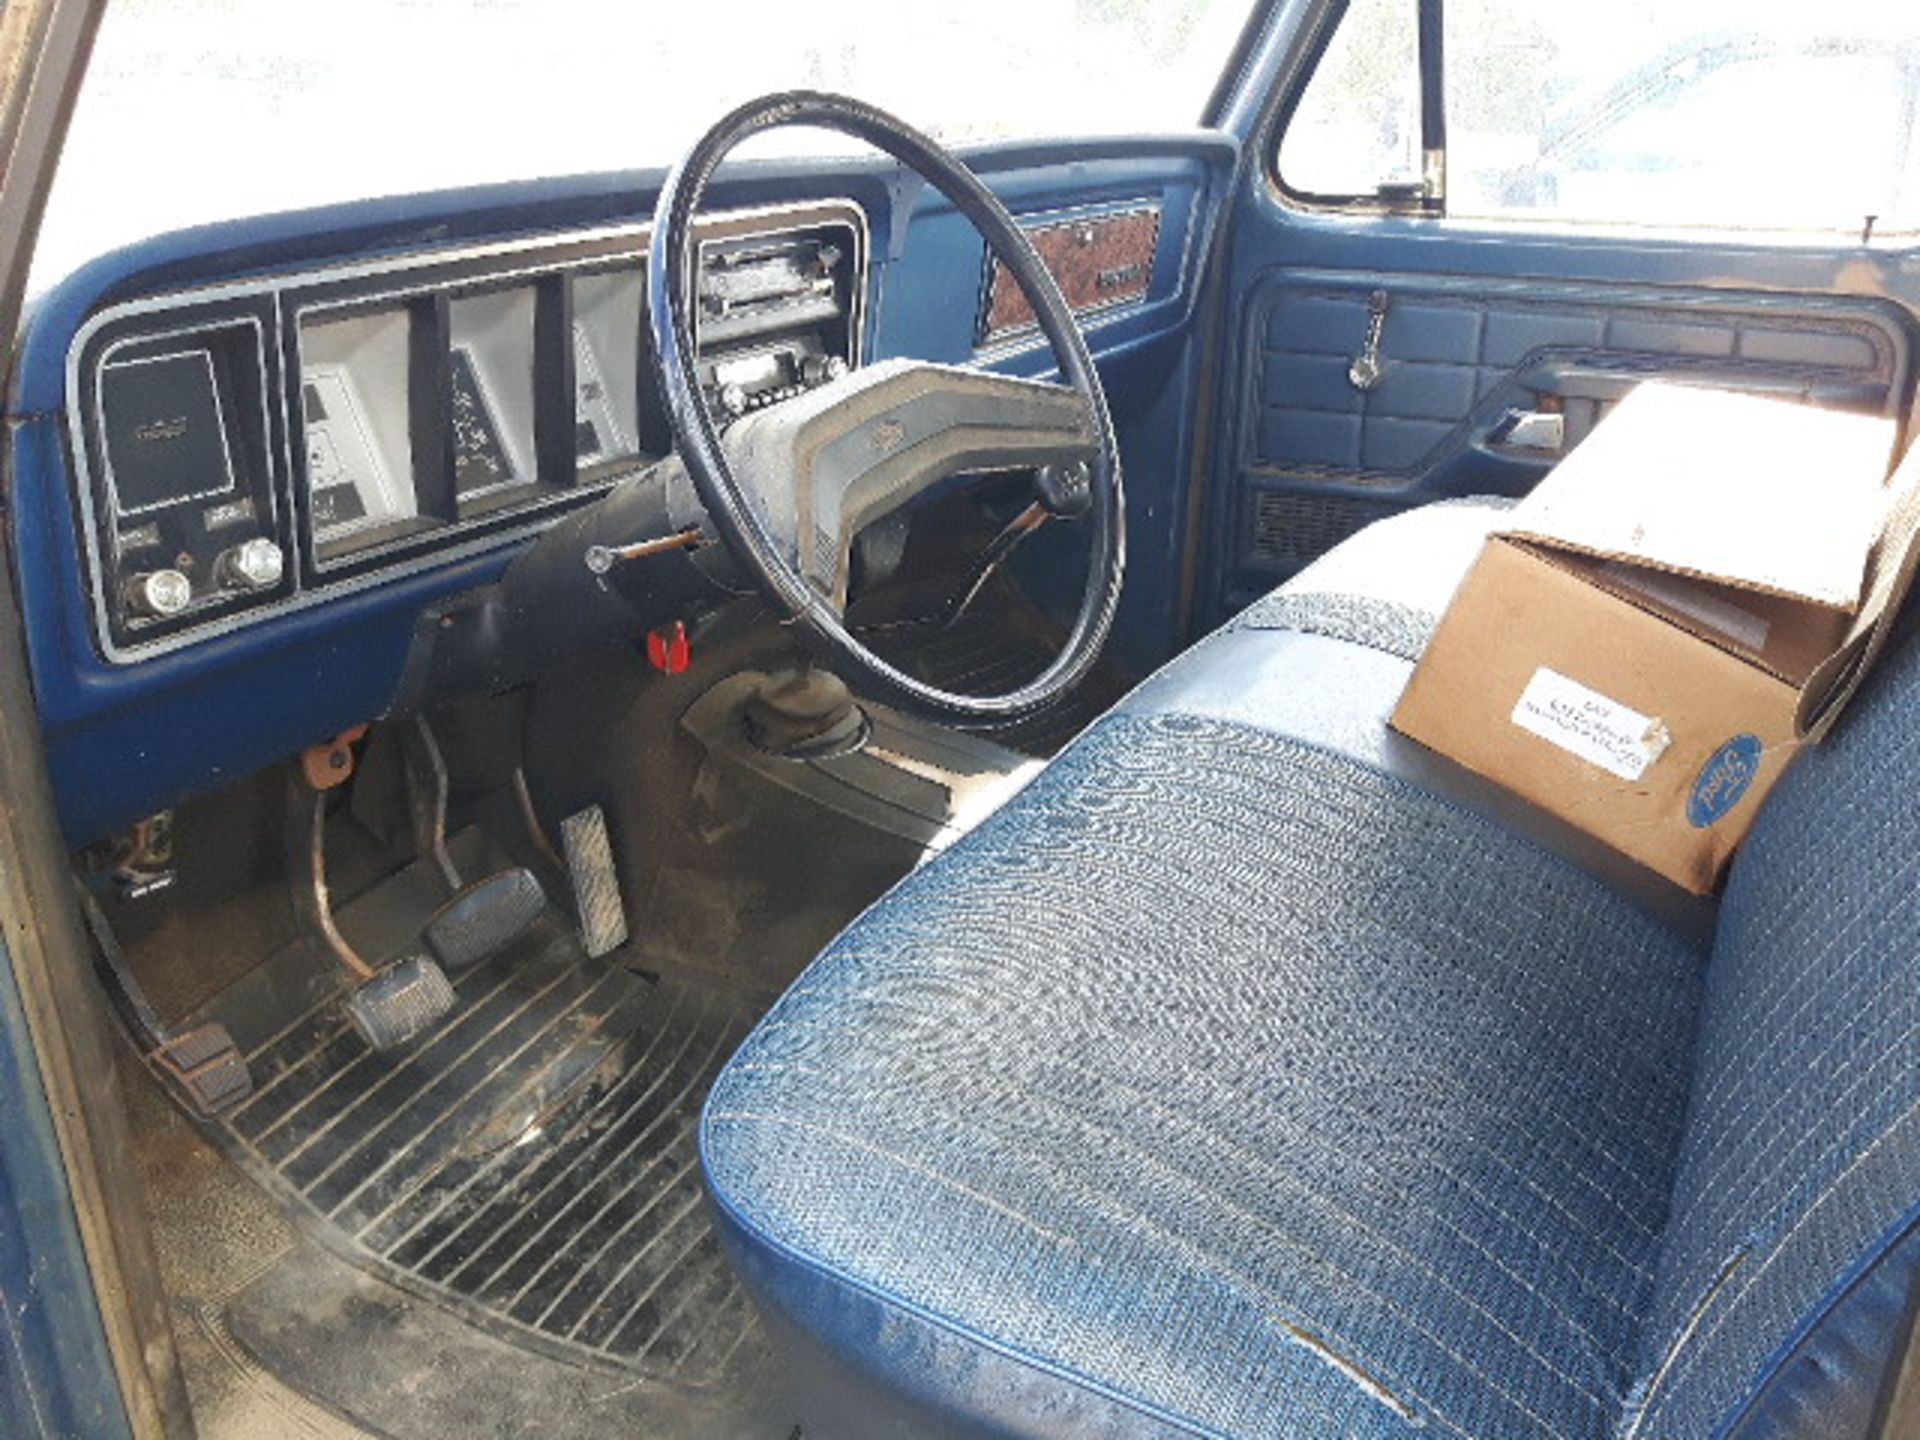 1979 Ford Super Cab Pickup - Image 3 of 5